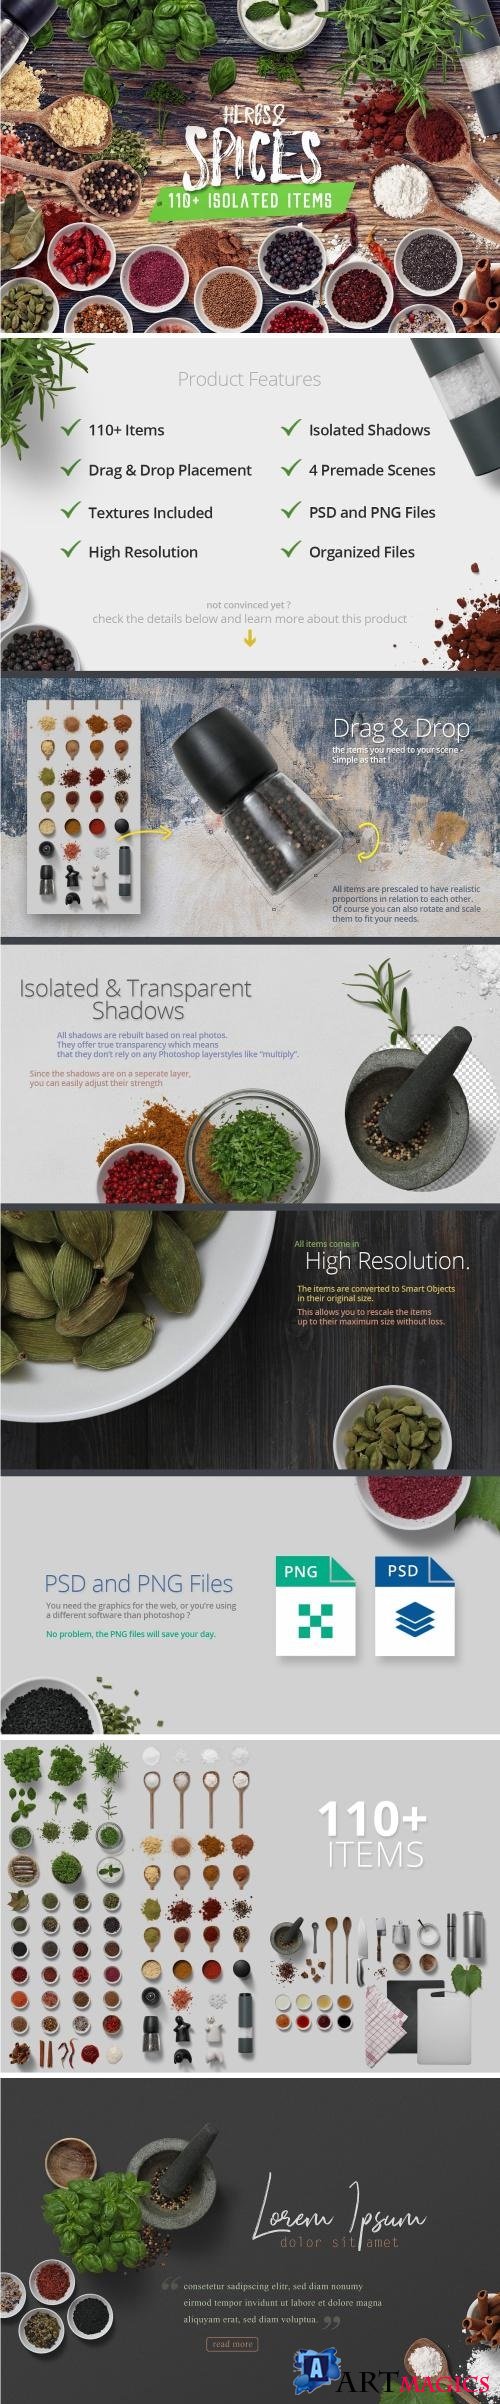 Herbs & Spices - Isolated Food Items - 2210606